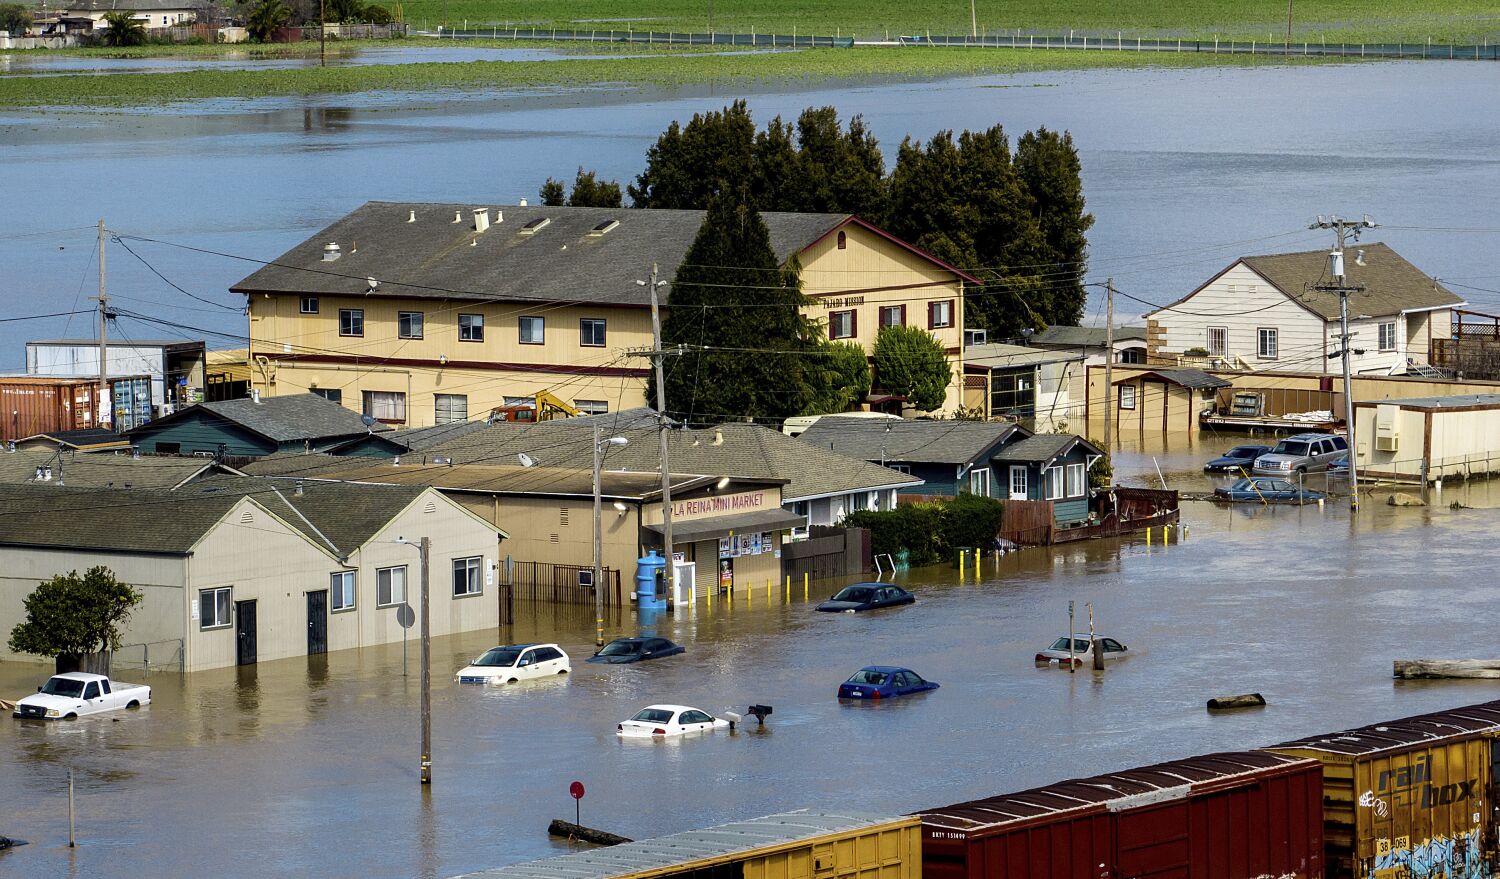 Residents left in flooded California farm town feel 'abandoned' as levees fail